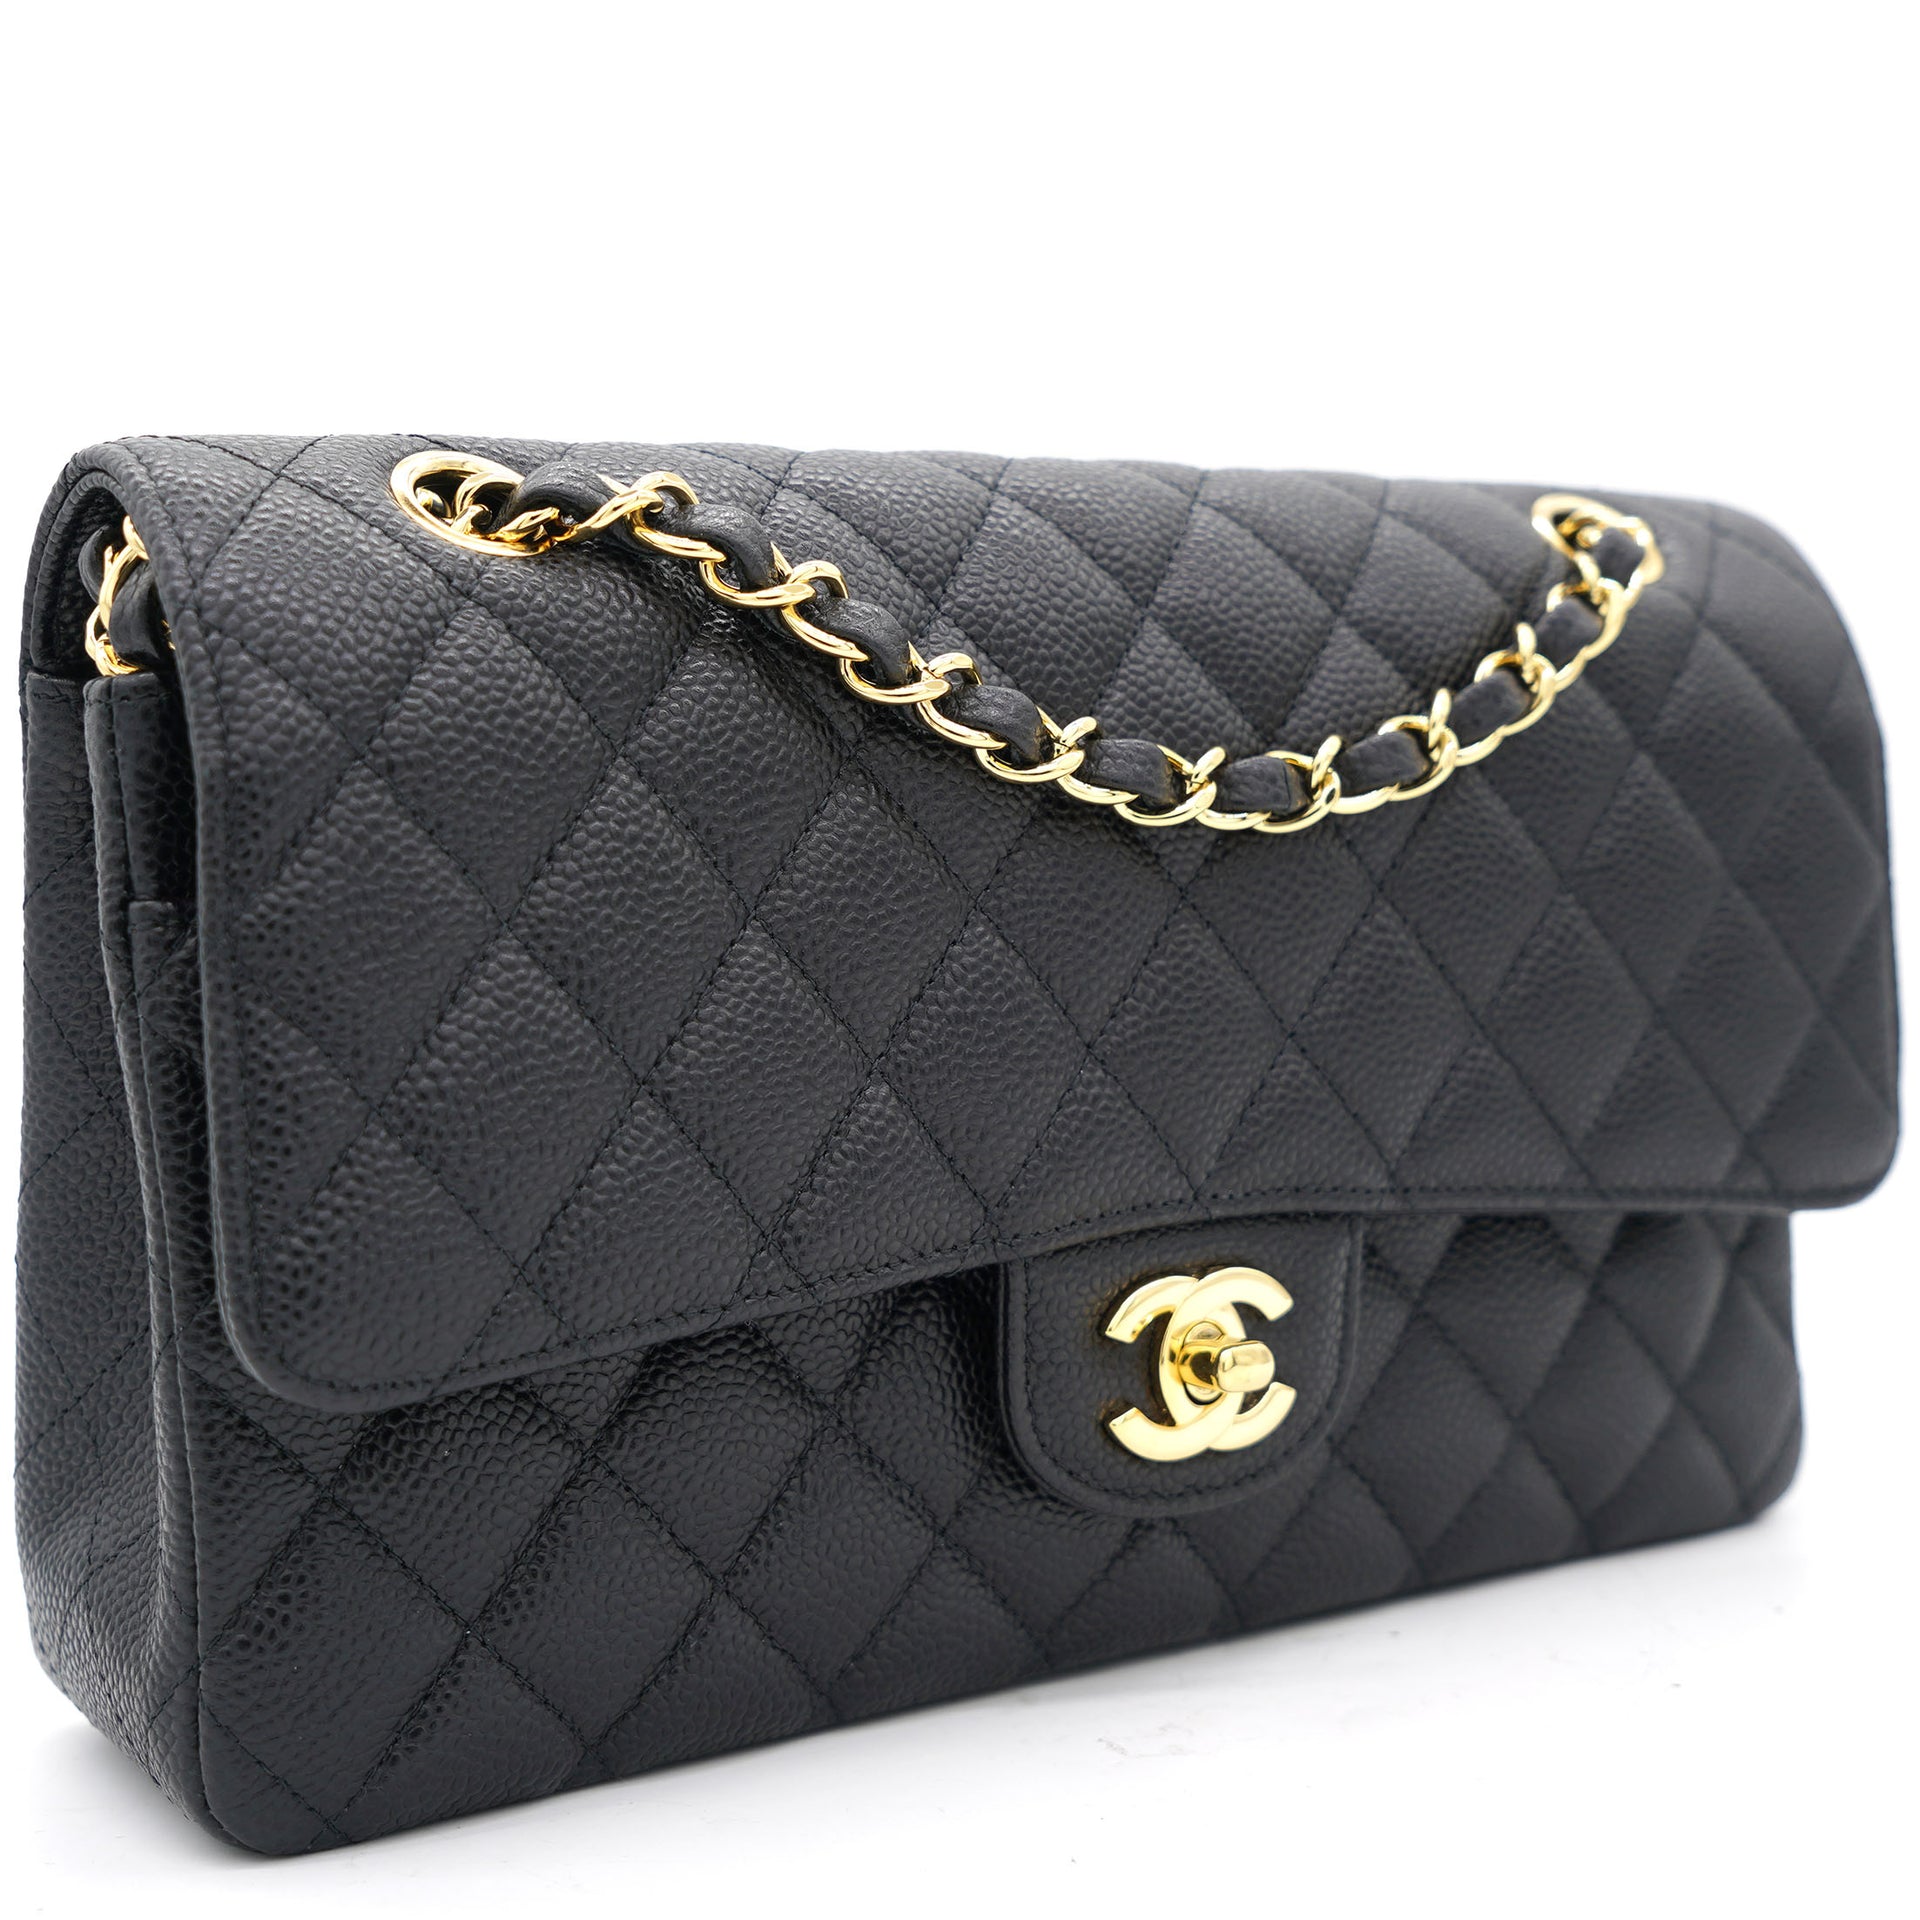 Chanel Classic 255 Medium Flap in Navy Blue Caviar with Gold Hardware   SOLD